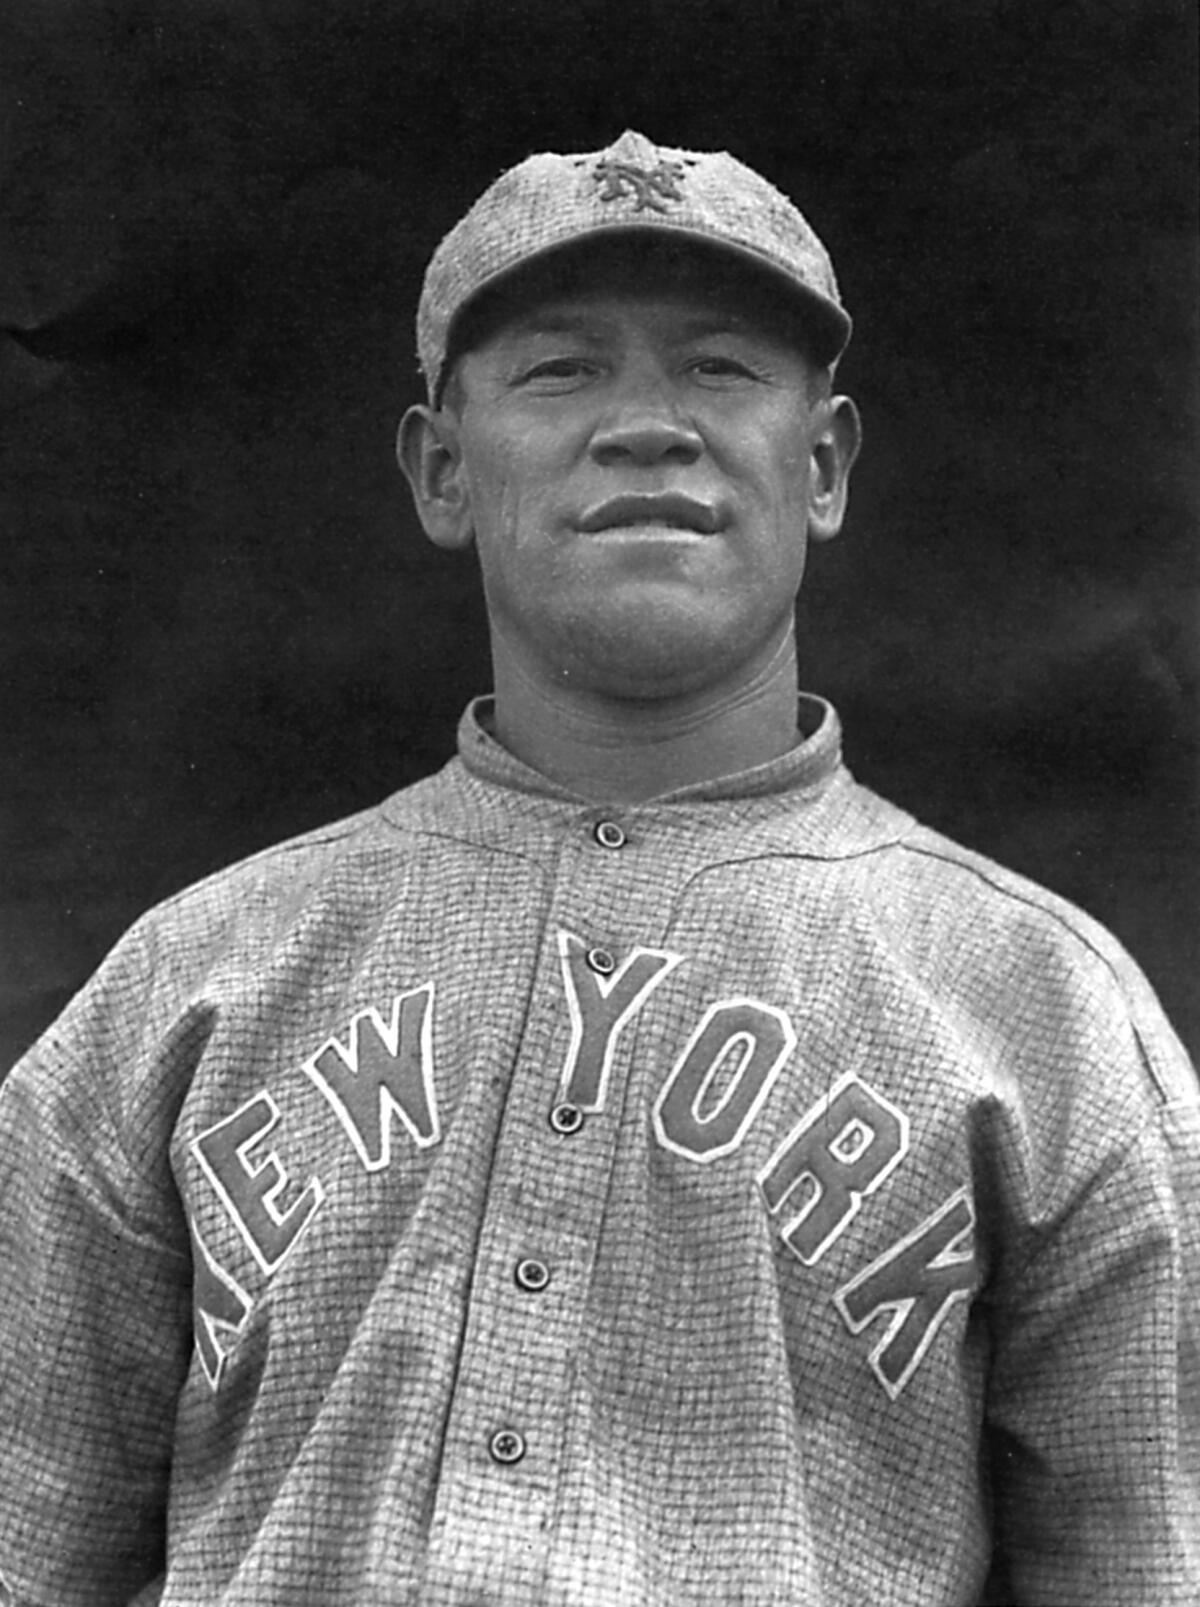 McGraw signed Thorpe in part to use him as a featured attraction on a world tour after the 1913 season.